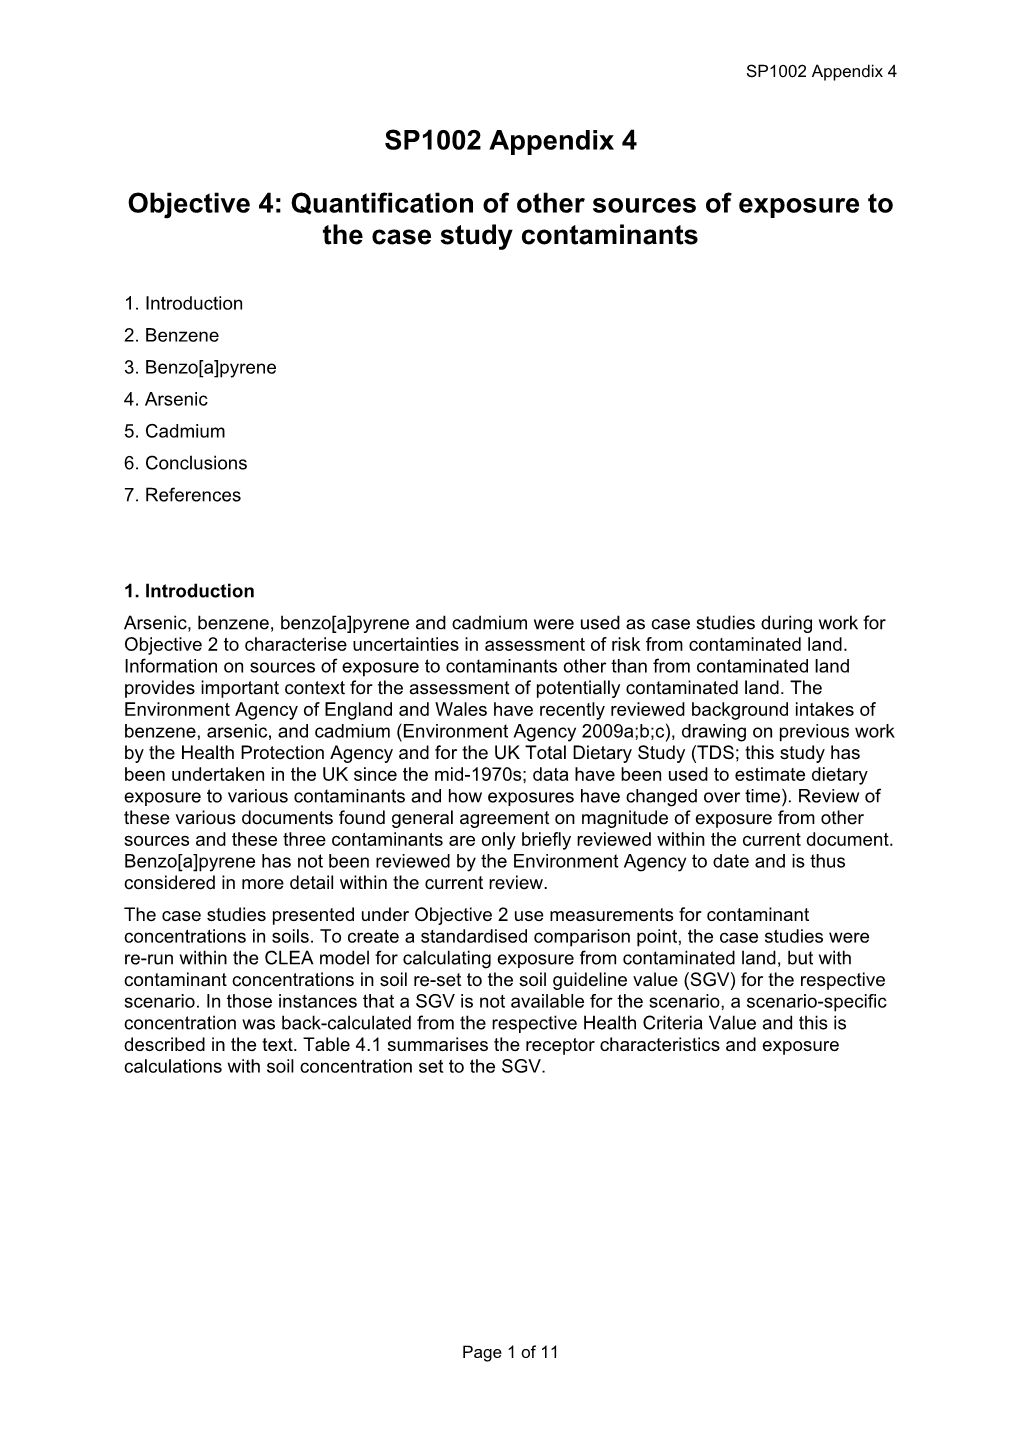 Other Sources of Exposure to the Case Study Contaminants